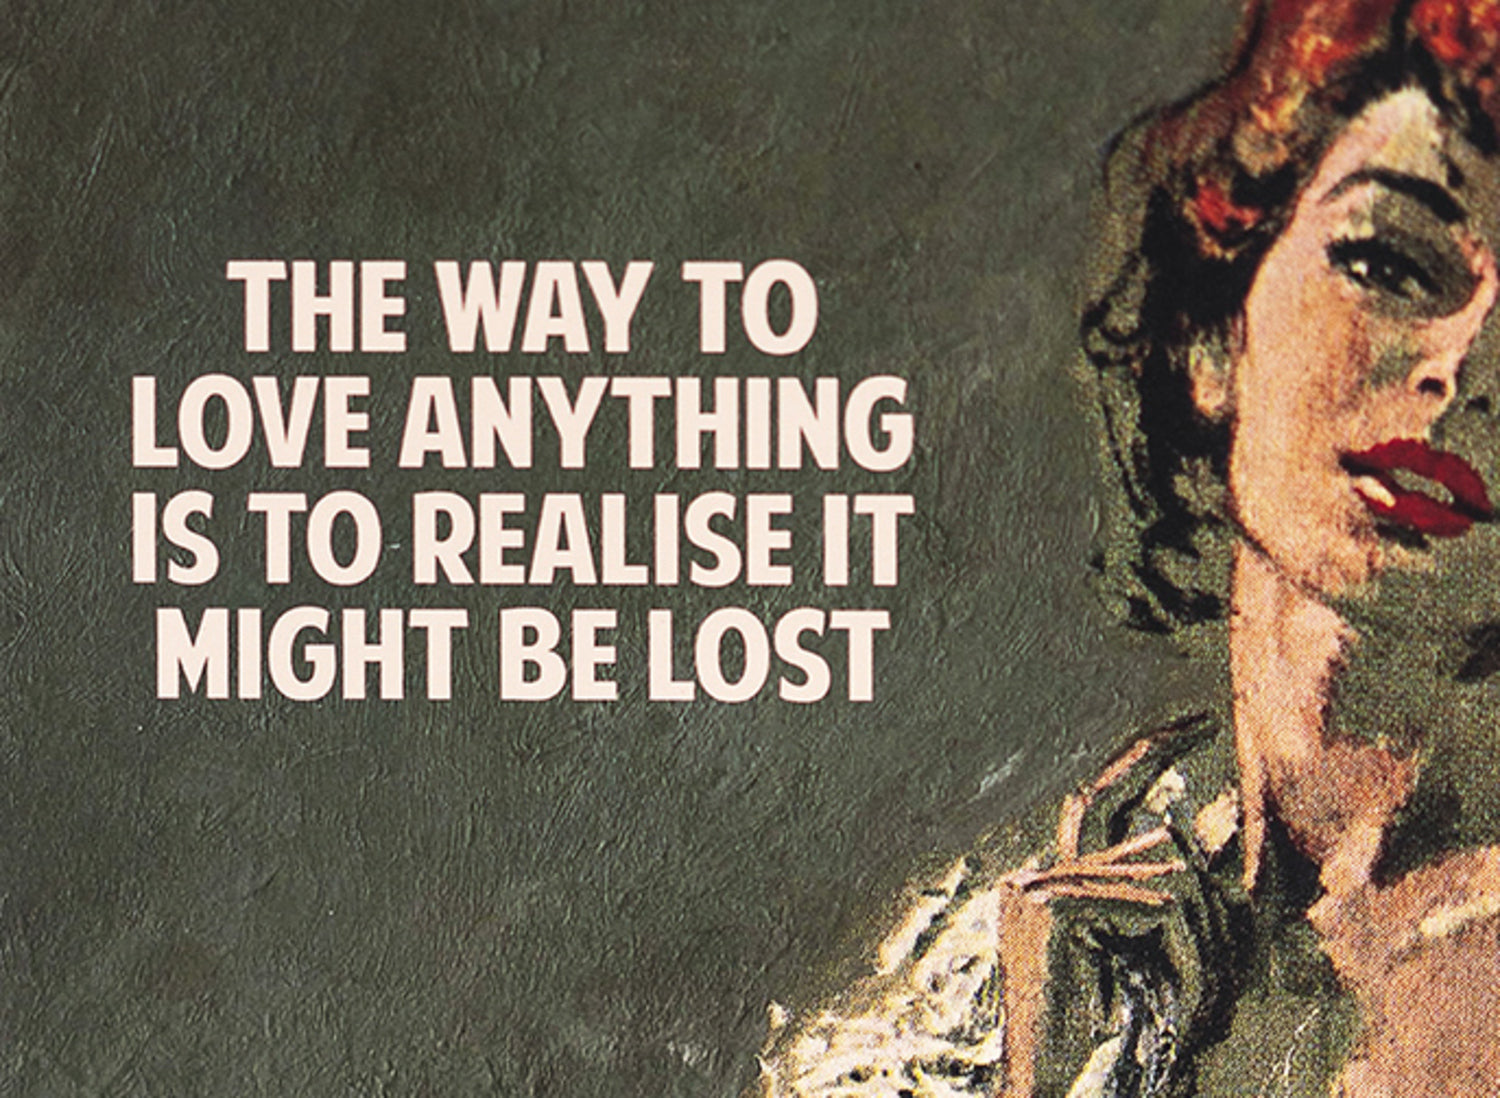 The Way To Love Anything Is To Realise It May Be Lost